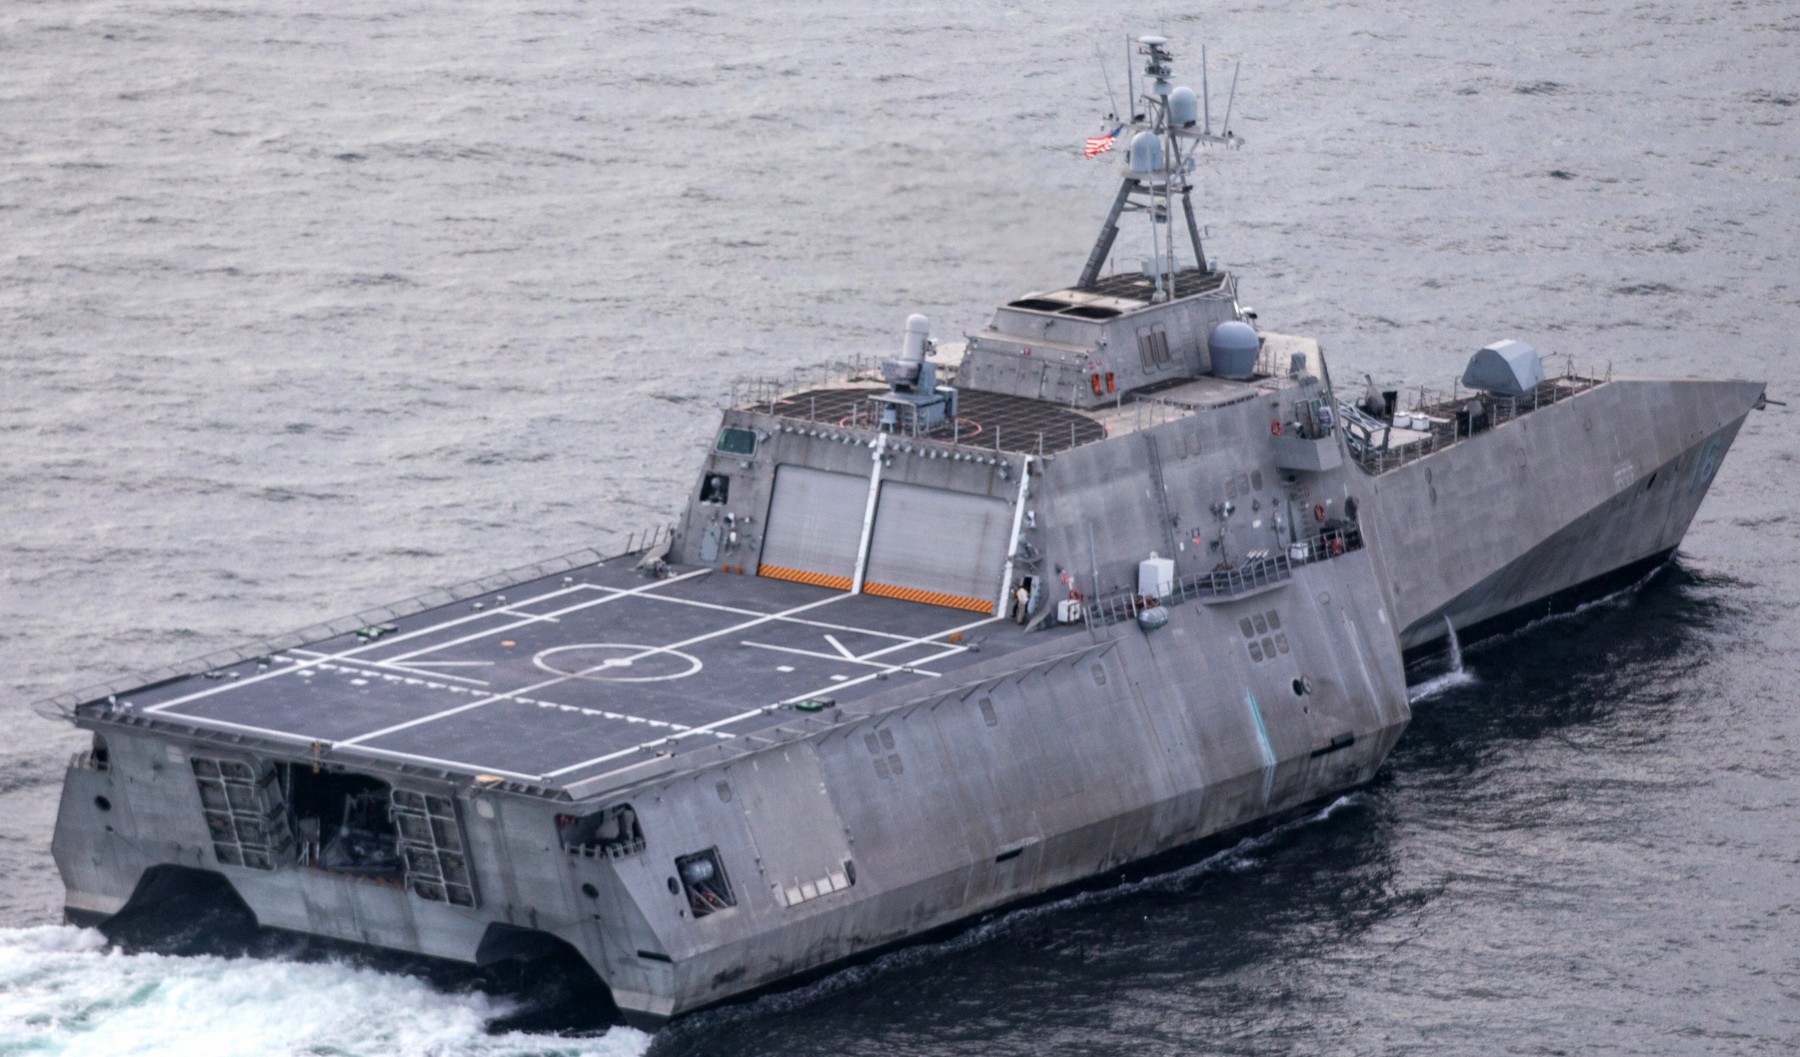 lcs-16 uss tulsa independence class littoral combat ship us navy strait of malacca 51